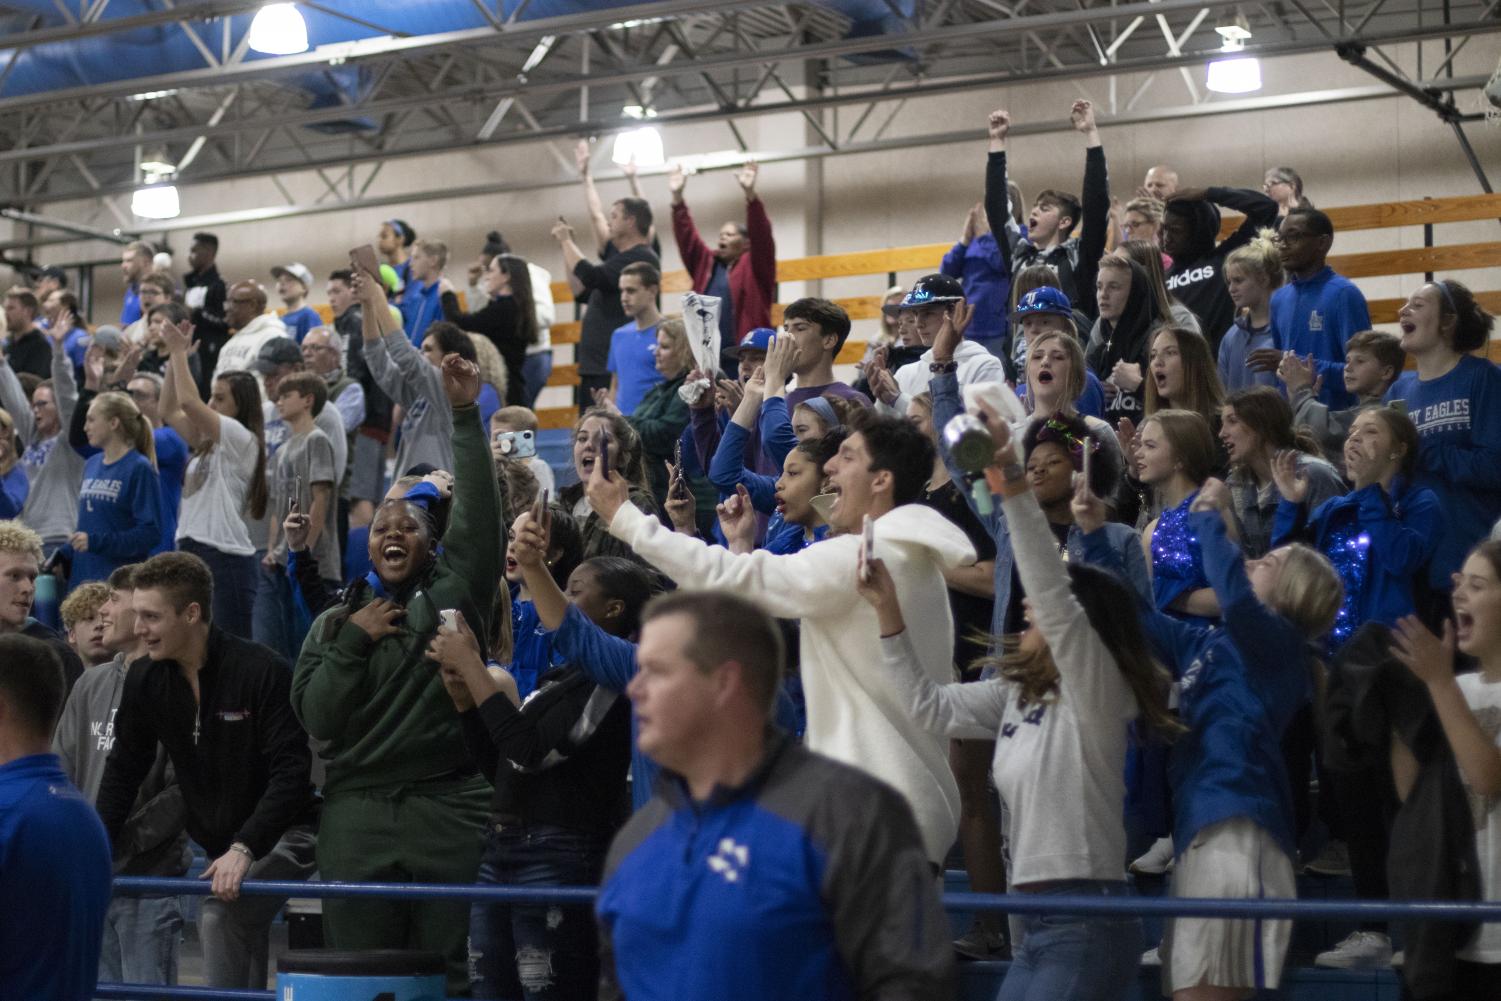 The student section roars after lindale scores a point during the basketball game. I love the energy that I get to show with my friends for the basketball team. Junior Jared Maeker said.